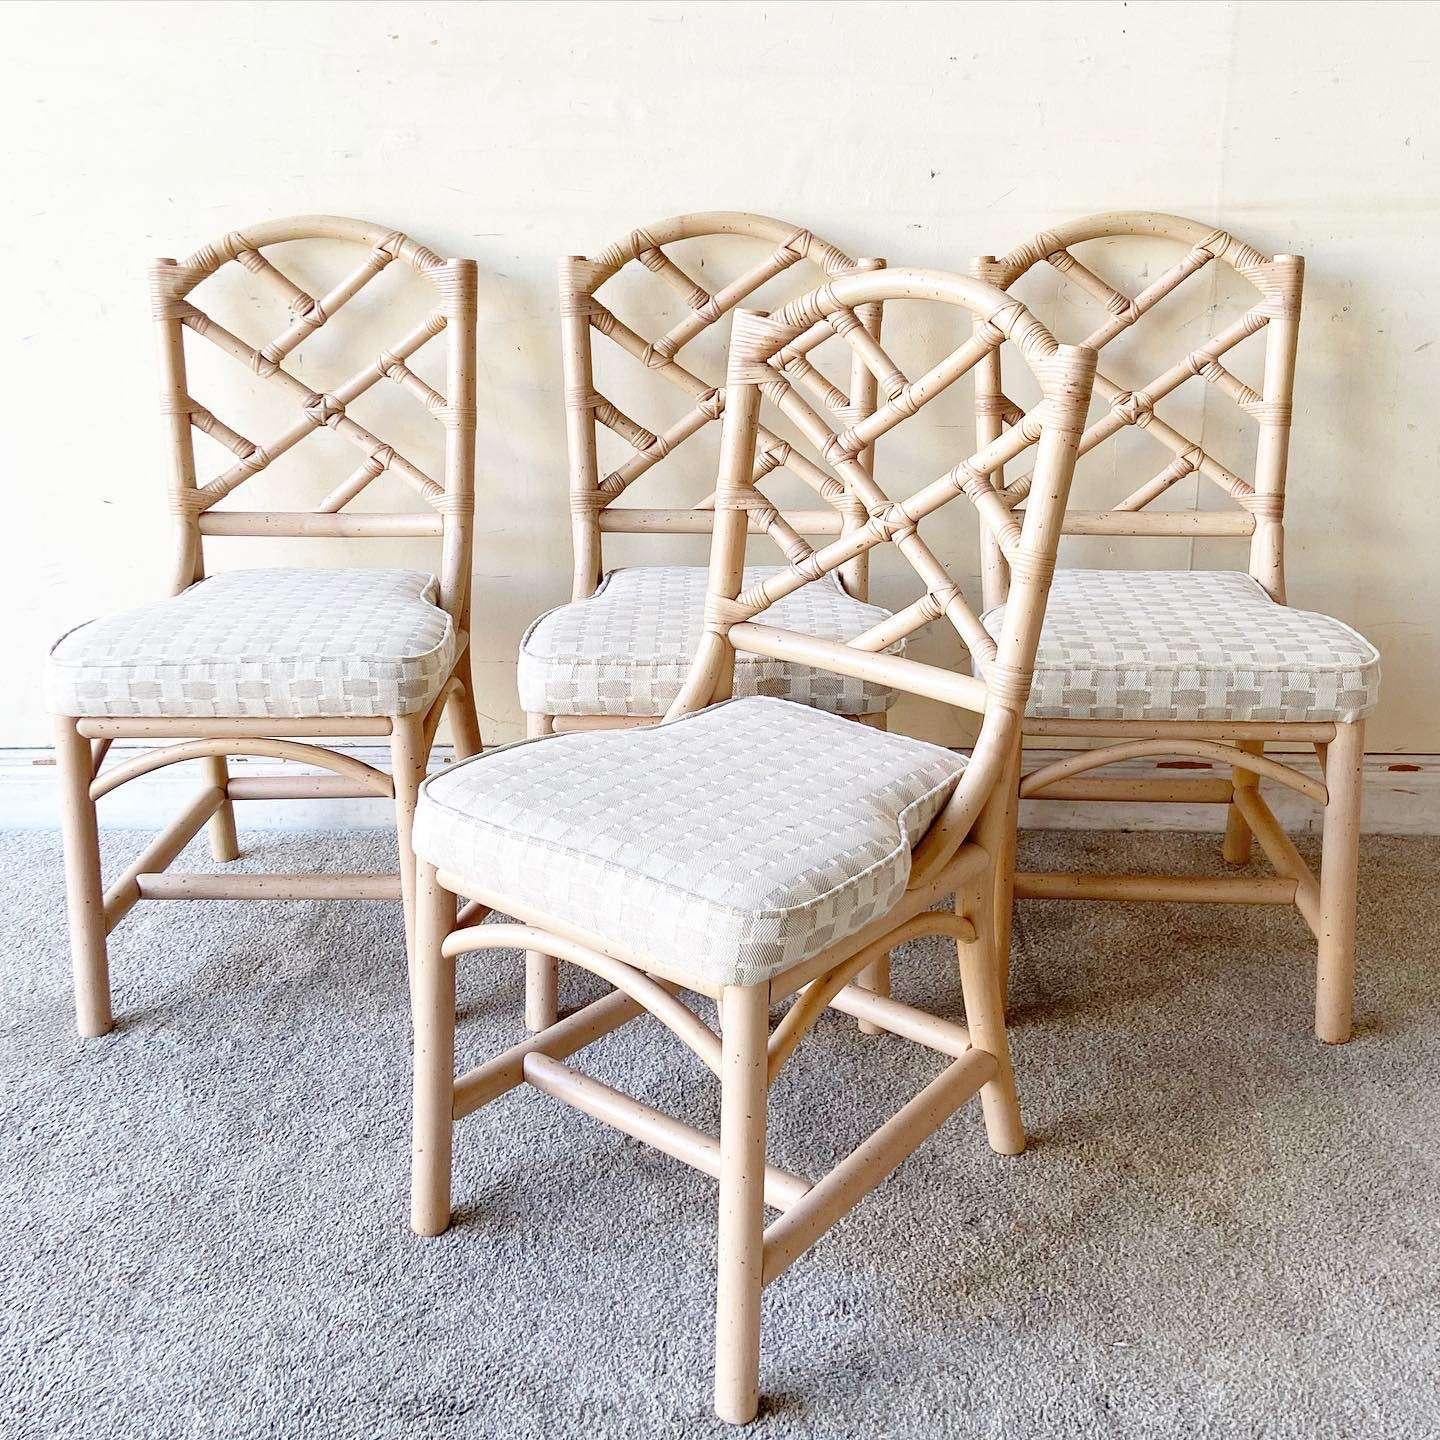 Exceptional set of 4 vintage bohemian bentwood rattan Chippendale style dining chairs. Feature a washed and spotted finish.

Seat height is 18.5 in